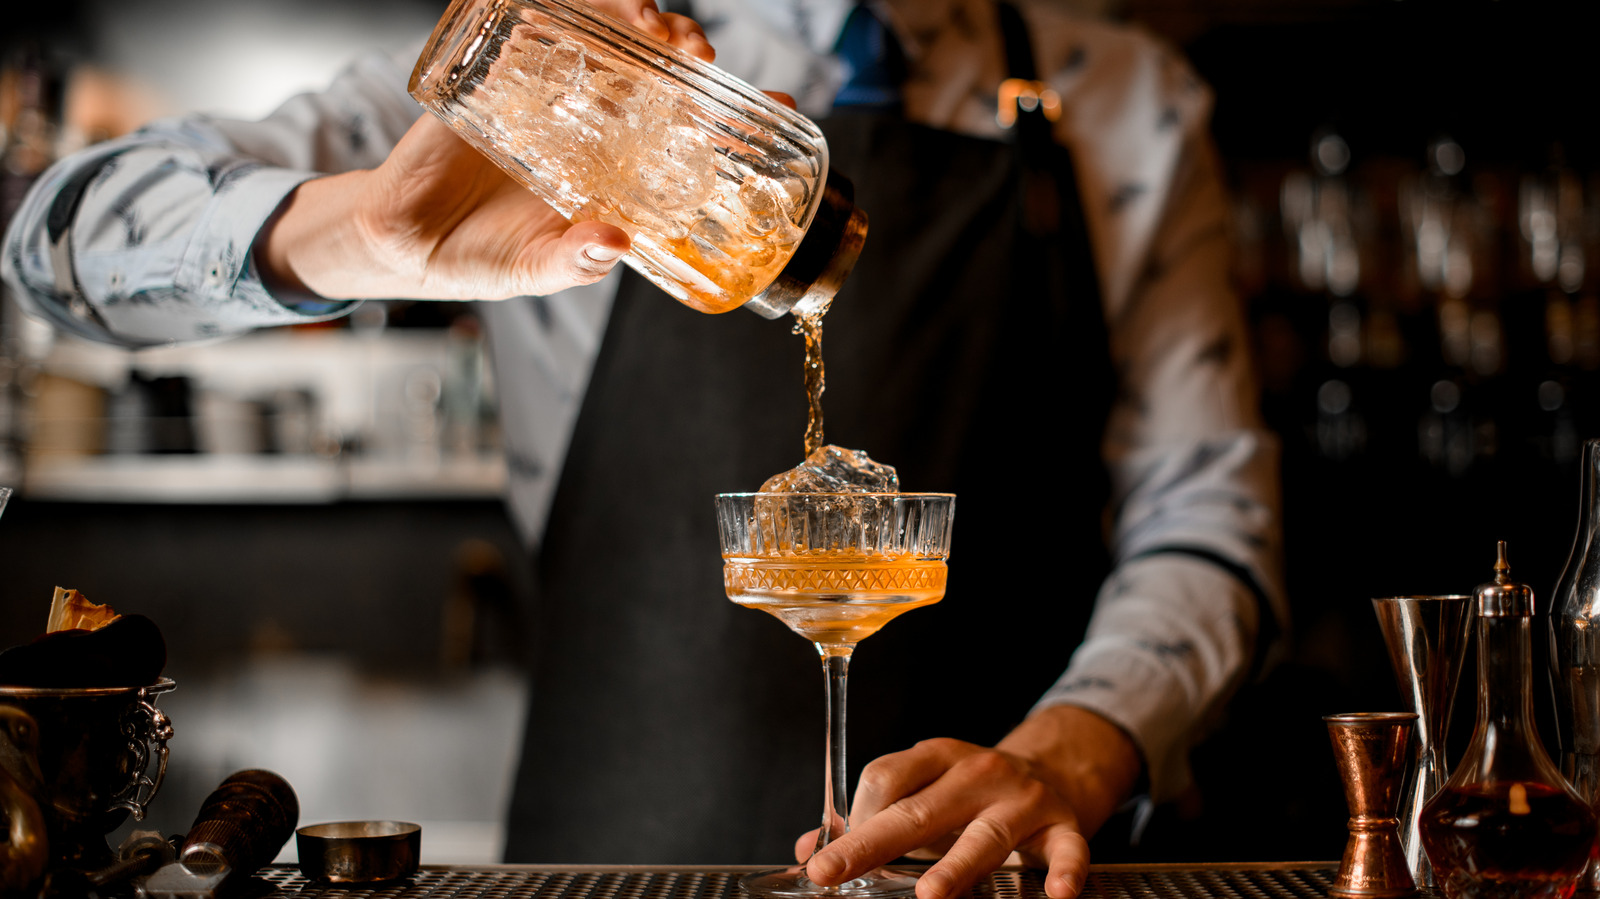 https://www.tastingtable.com/img/gallery/16-ways-cocktails-taste-better-at-a-bar-than-what-you-make-at-home/l-intro-1672851198.jpg